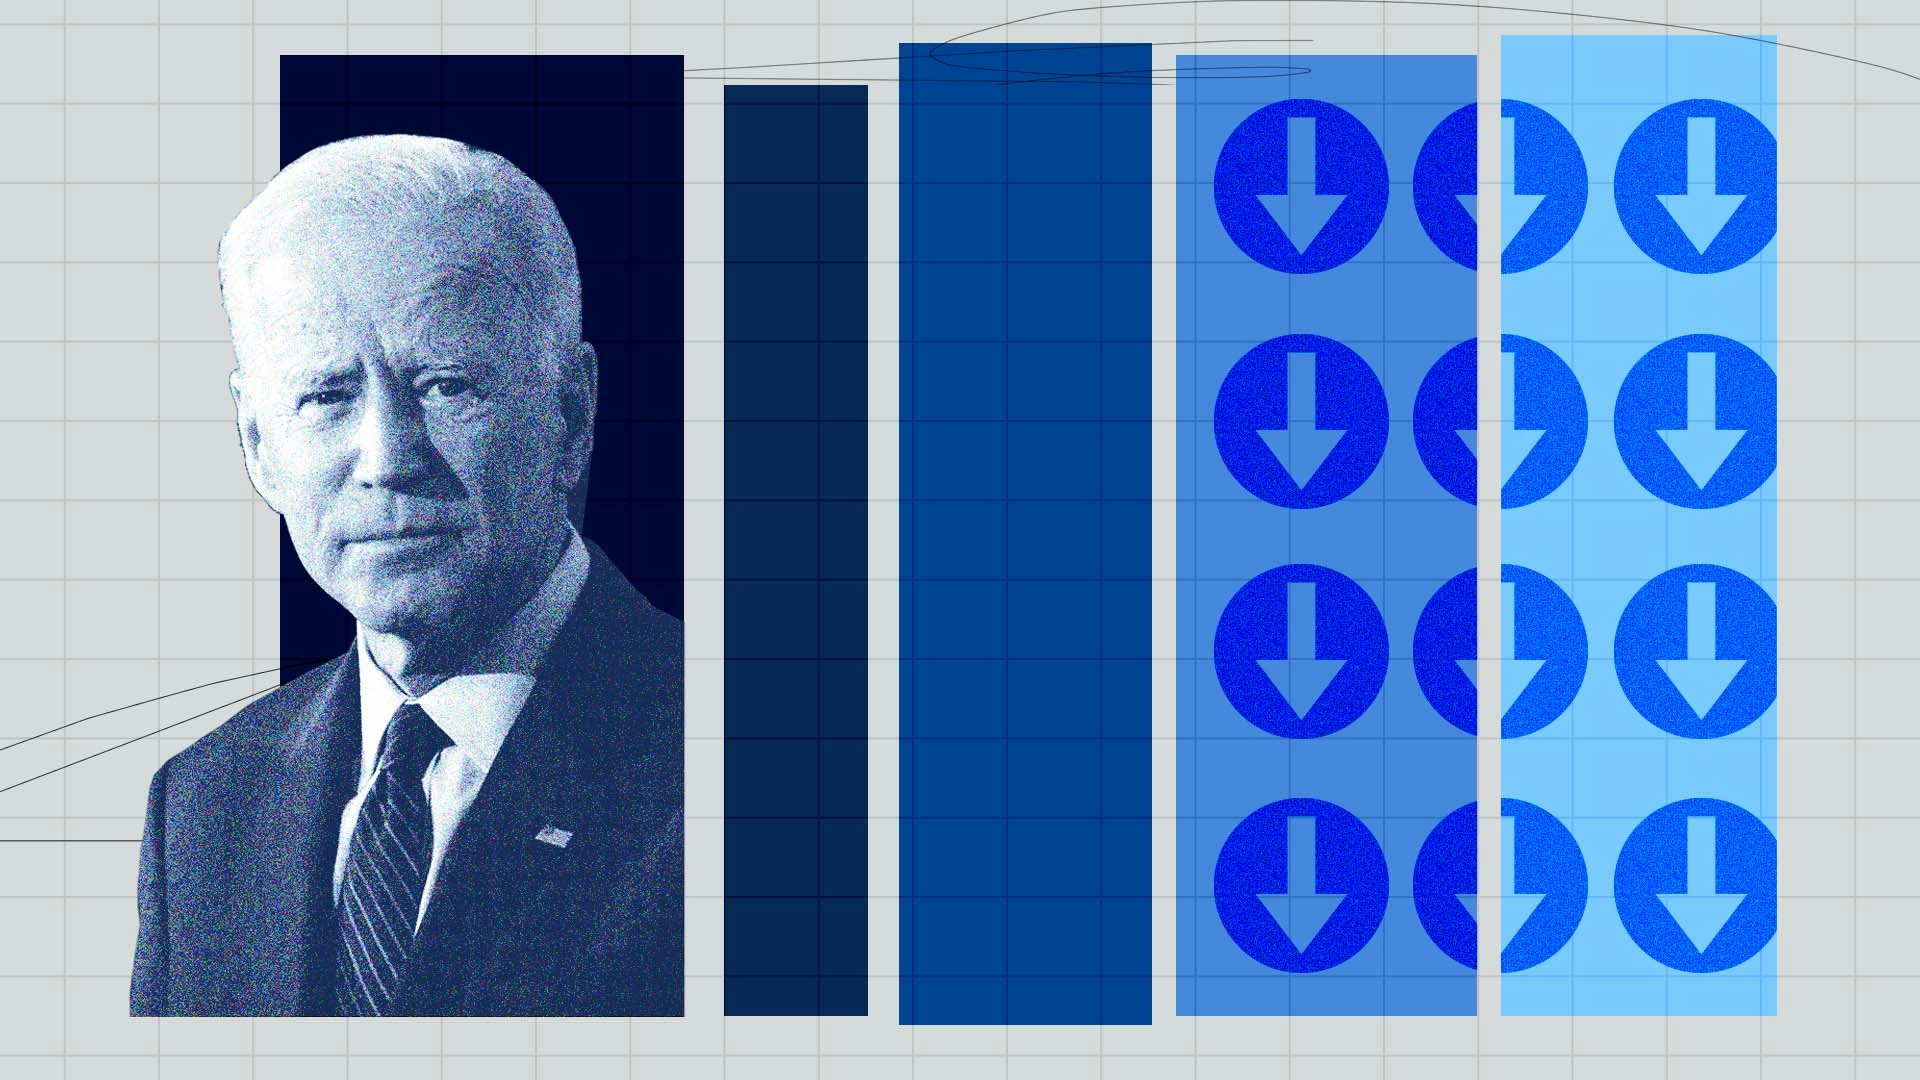 Graphic conveying President Biden's approval rating being underwater in 44 states